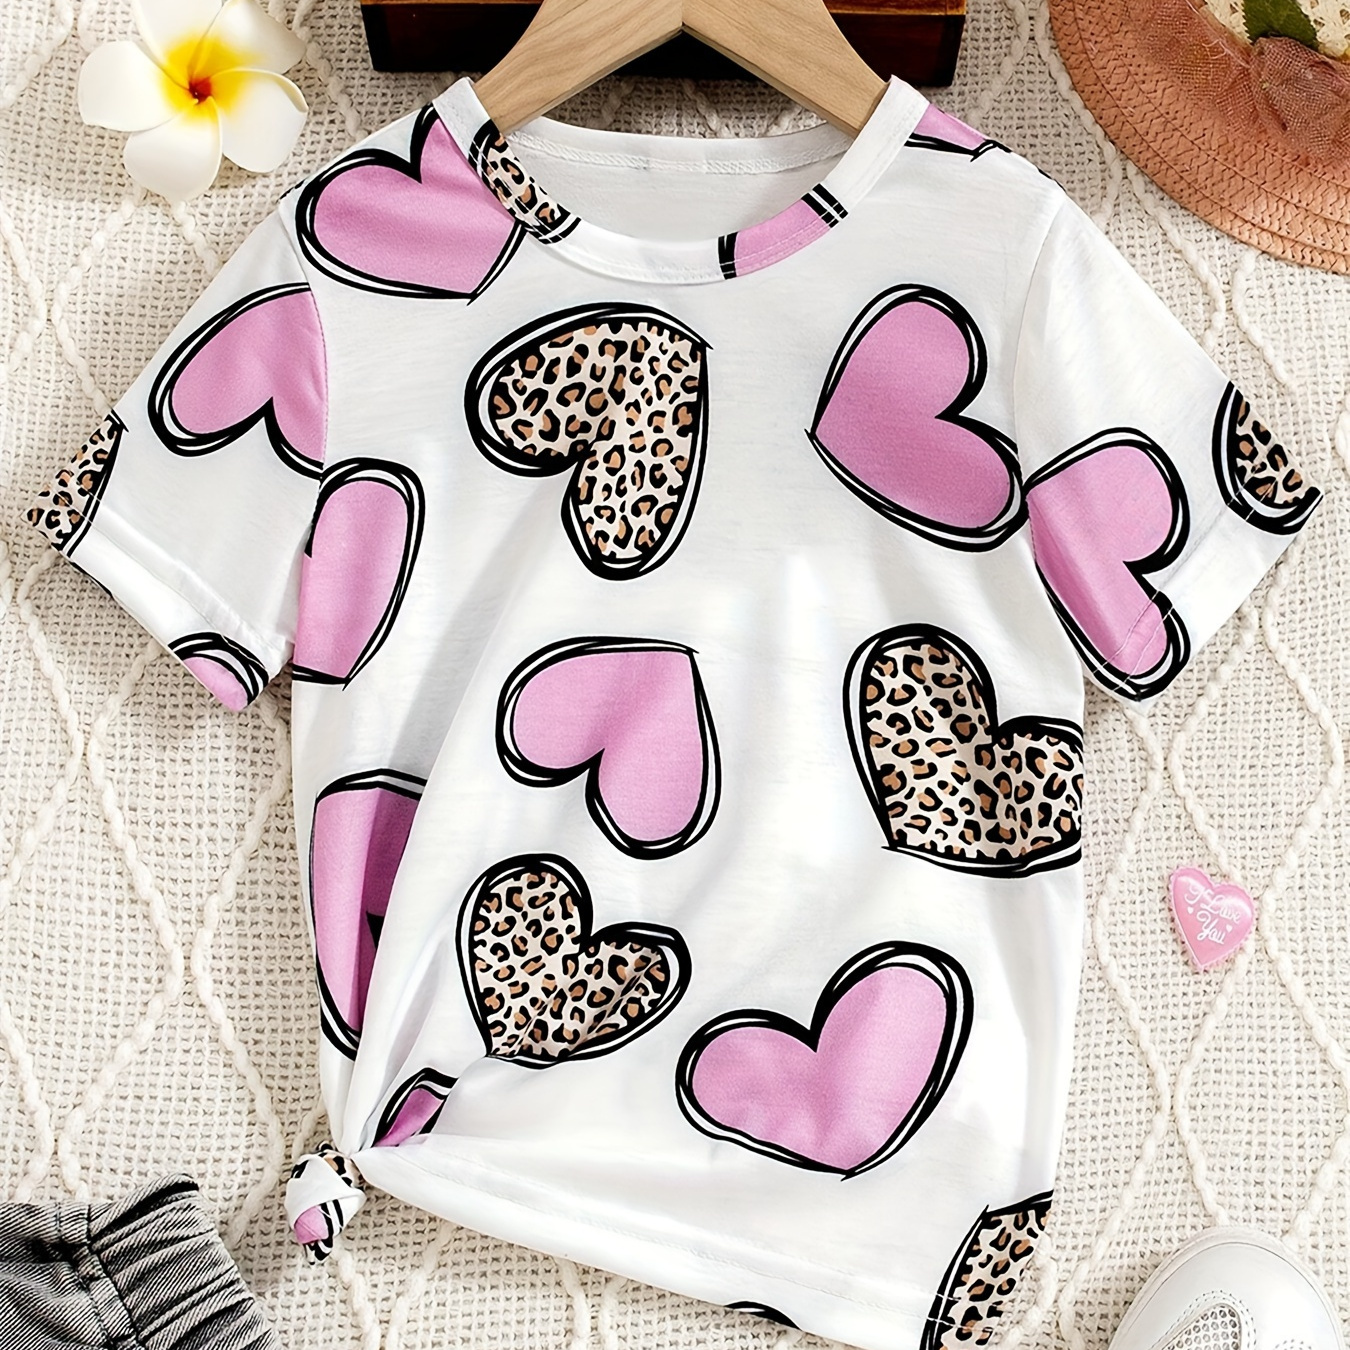 

Heart Patterned Leopard Print Short Sleeve Crew Neck T-shirt For Girls, Casual Comfy Breathable Tee Versatile Top Summer Gift